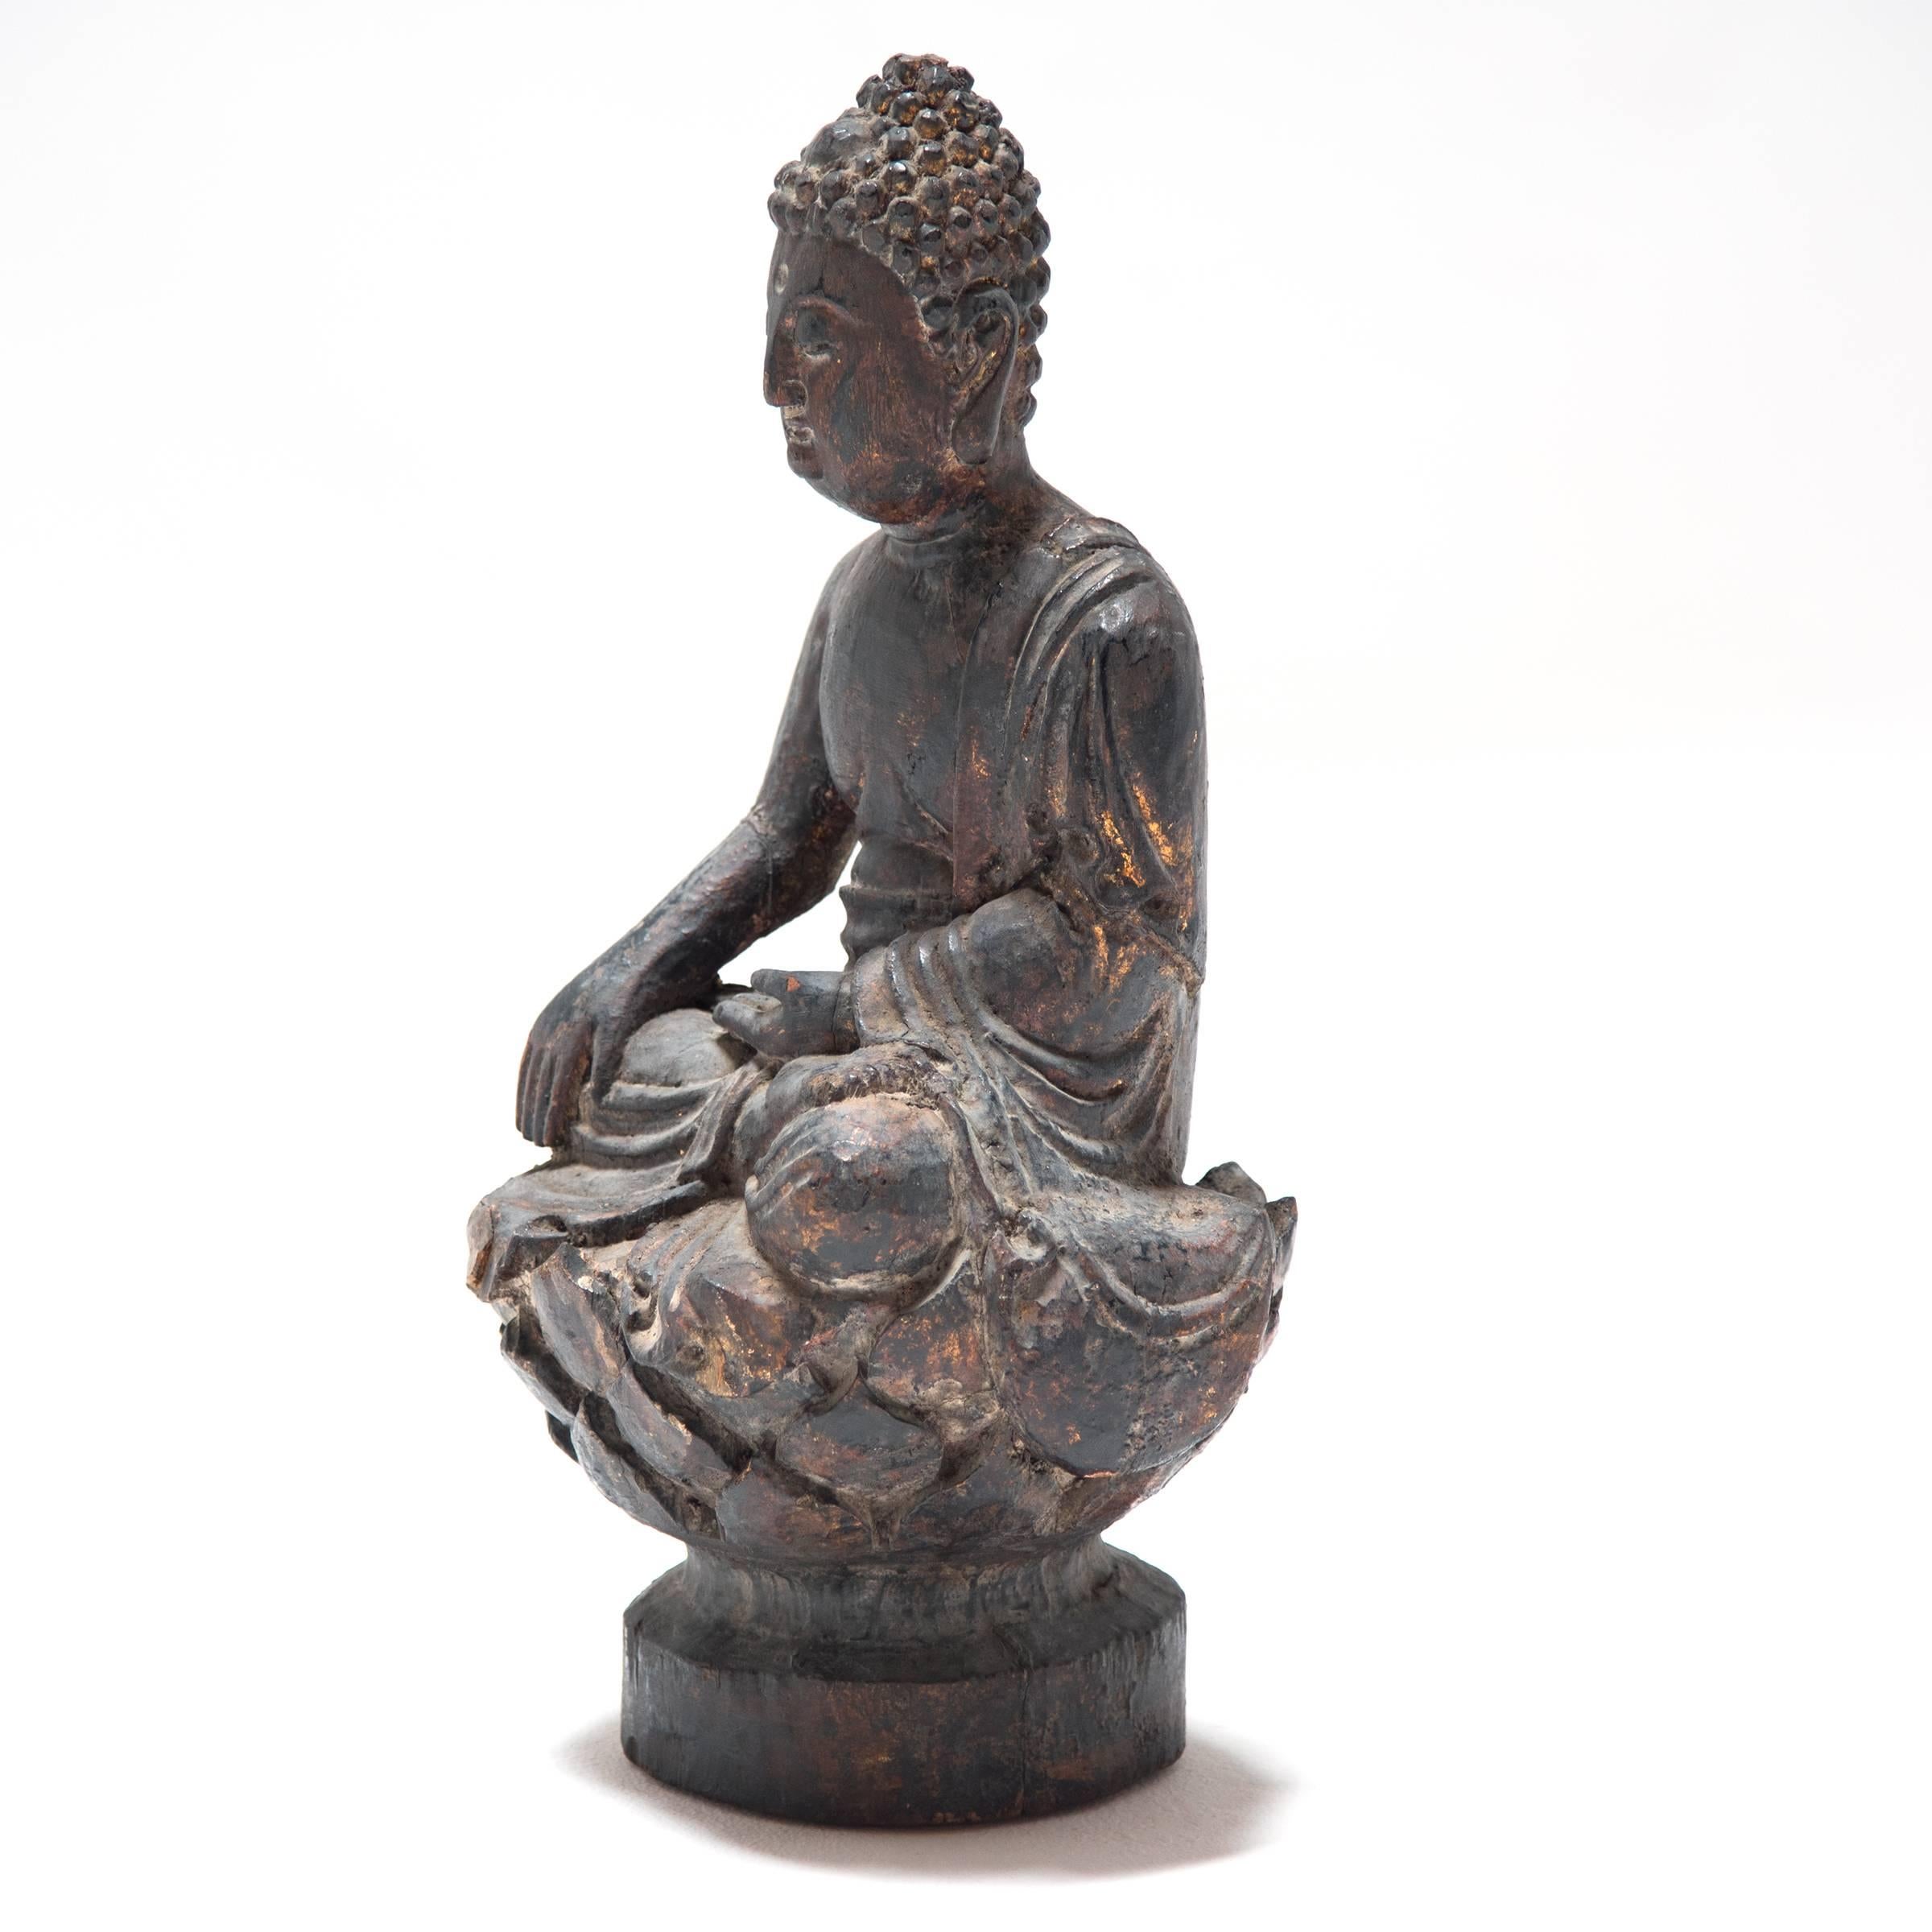 The flowing, draped robes that dress this serene depiction of the enlightened Buddha, Sakyamuni, are intricately carved. Traces of the the original lacquer are on the sole of his poised foot which is folded peacefully atop the sculpted lotus flower